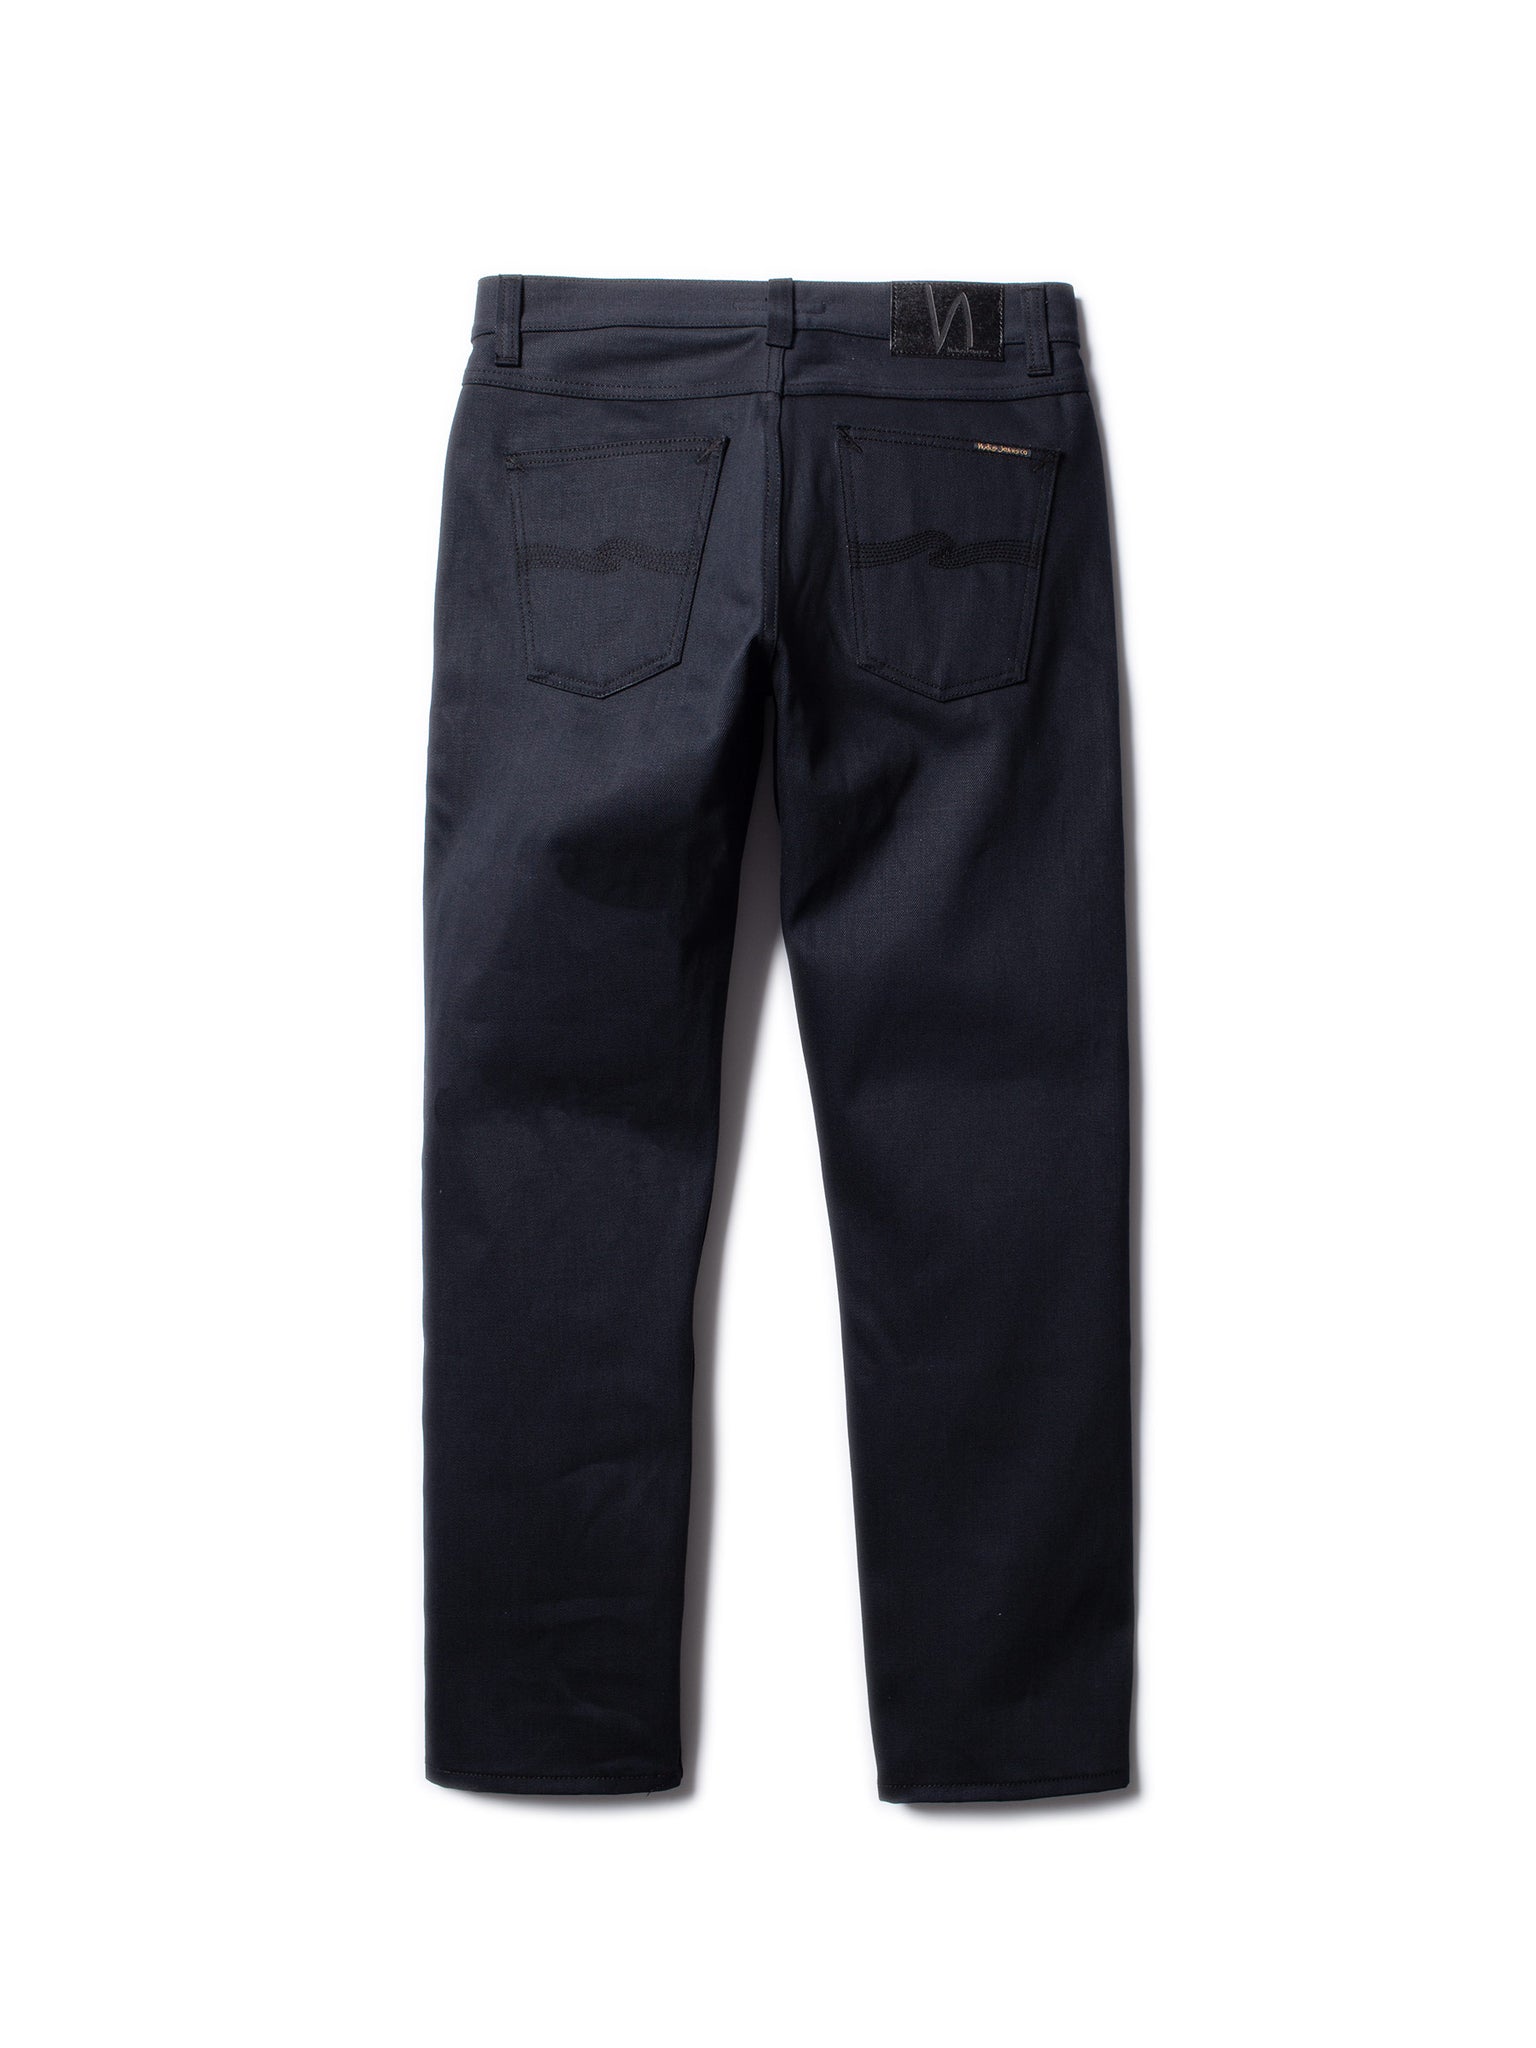 Gritty Jackson Dry Onyx Selvage